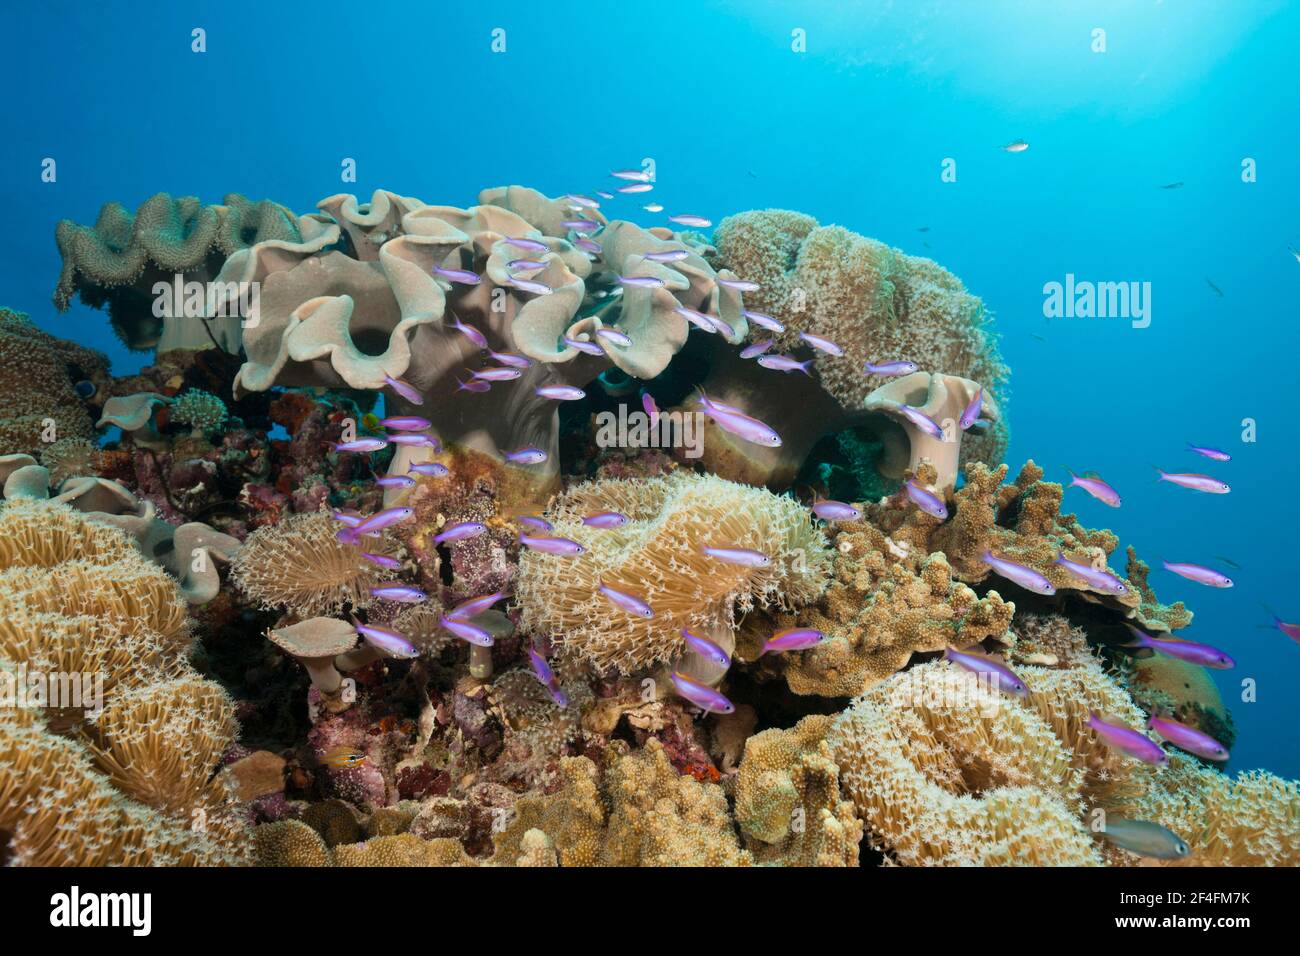 Whitleys flagfish (Luzonichthys whitleyi) among mushroom leather corals, Great Barrier Reef, Australia Stock Photo